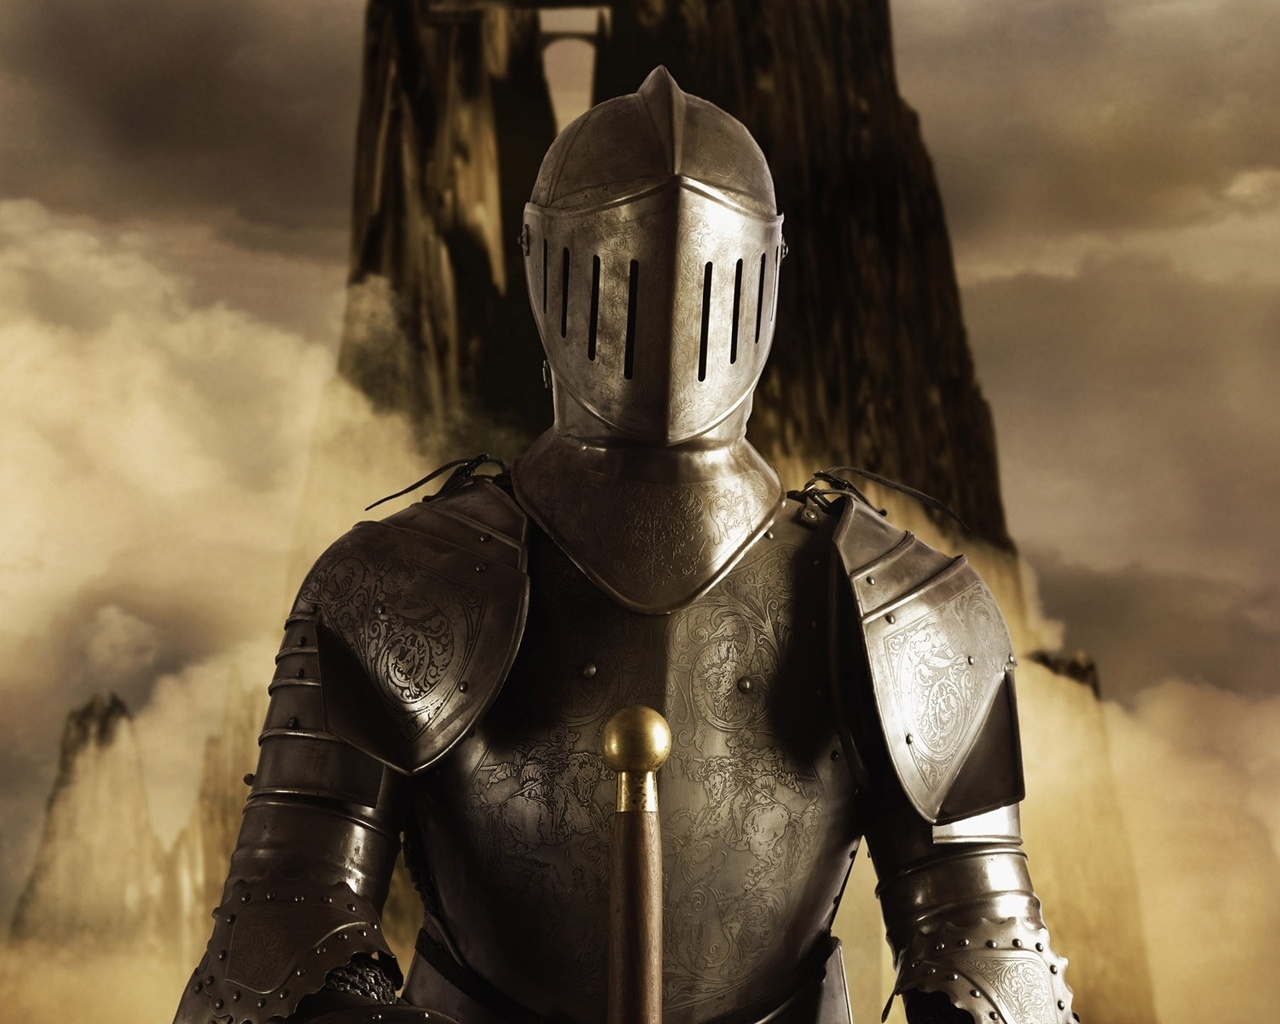 Knight for 1280 x 1024 resolution